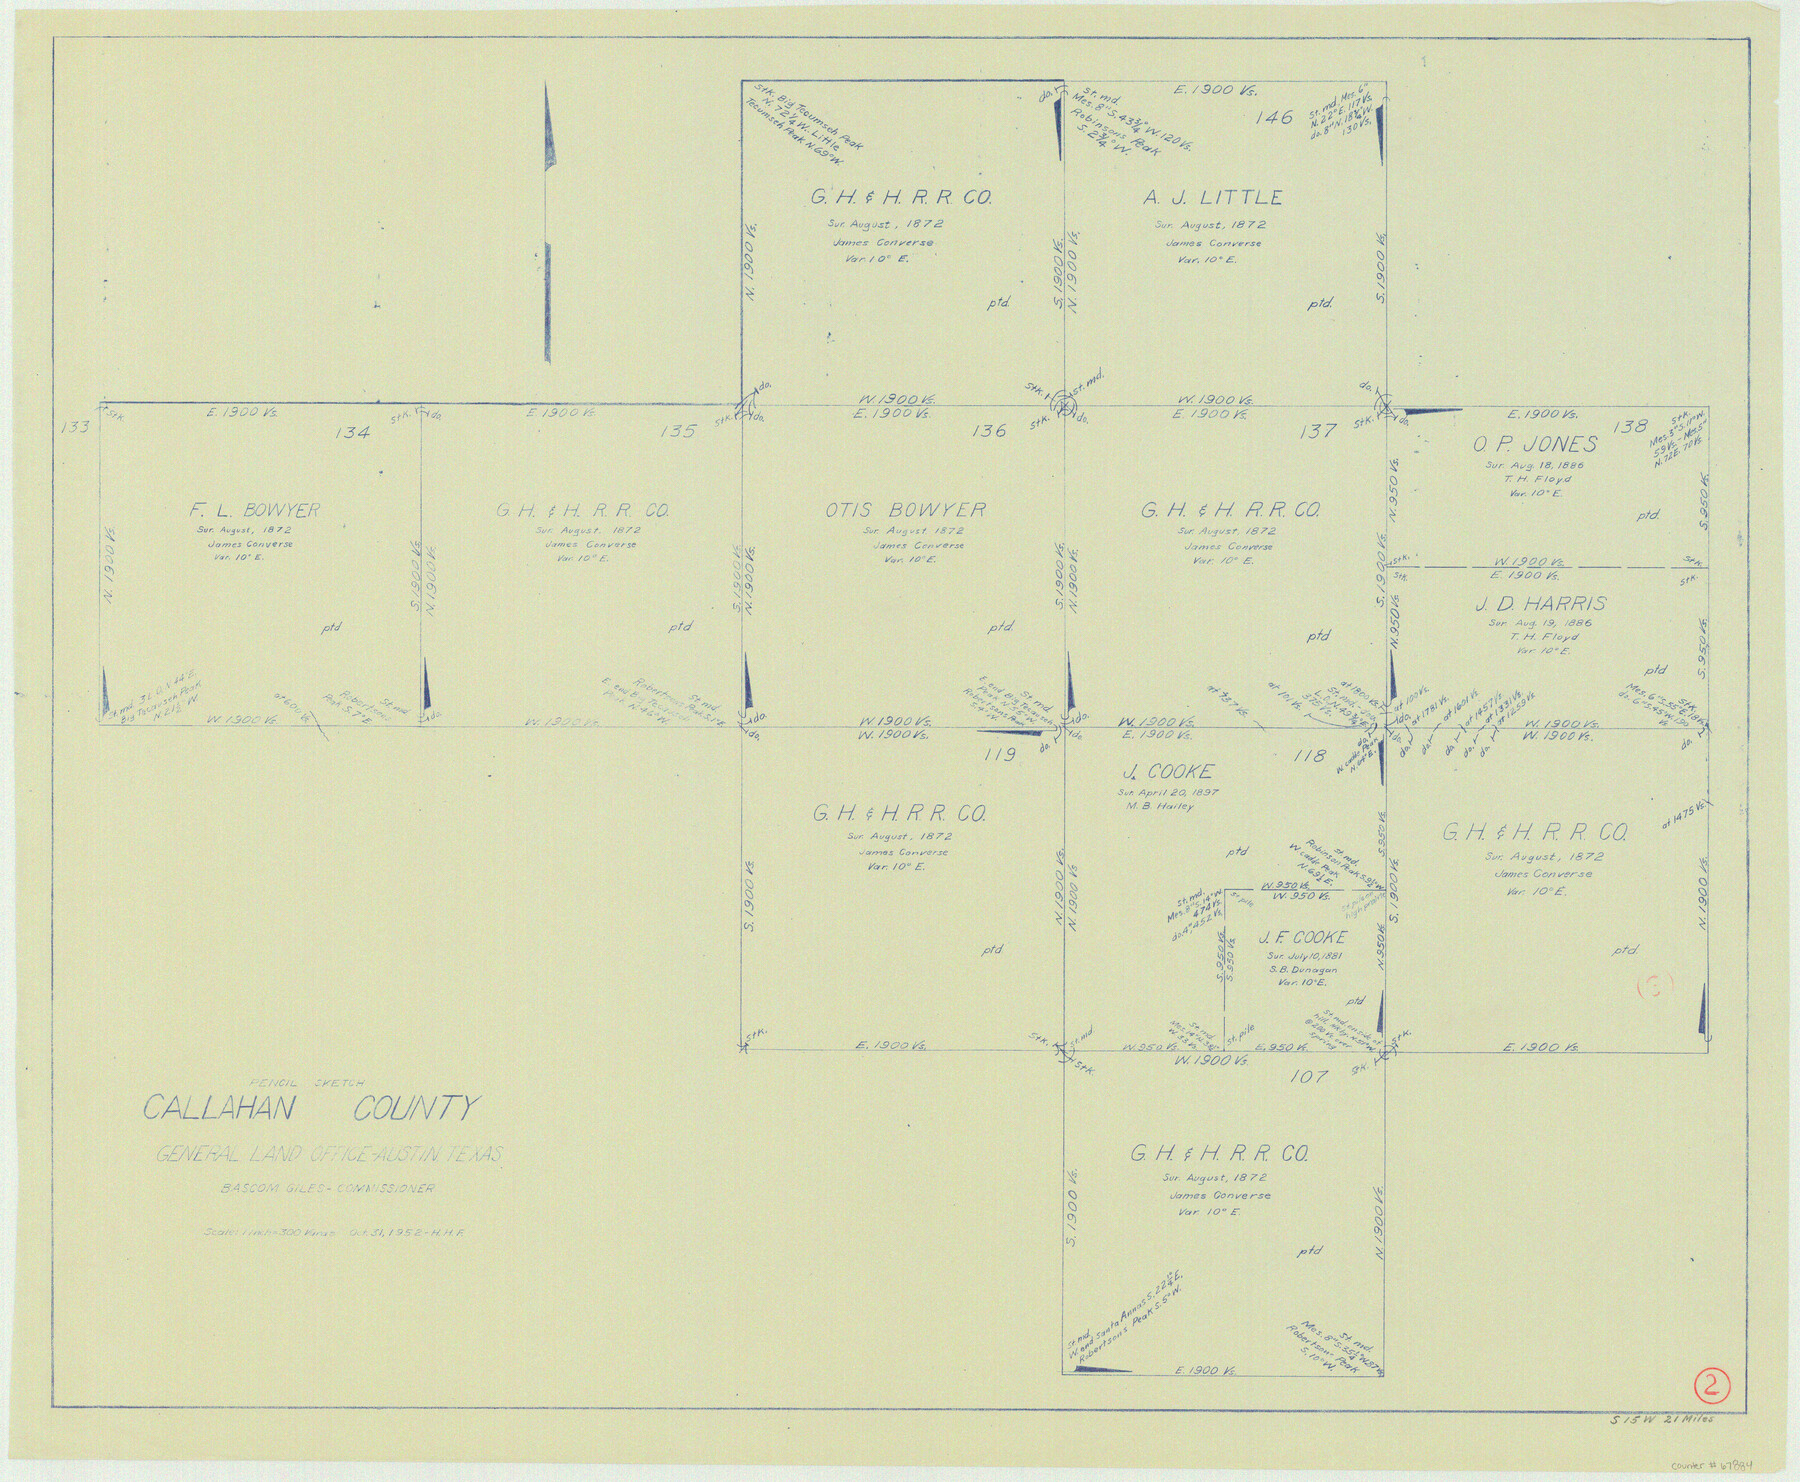 67884, Callahan County Working Sketch 2, General Map Collection